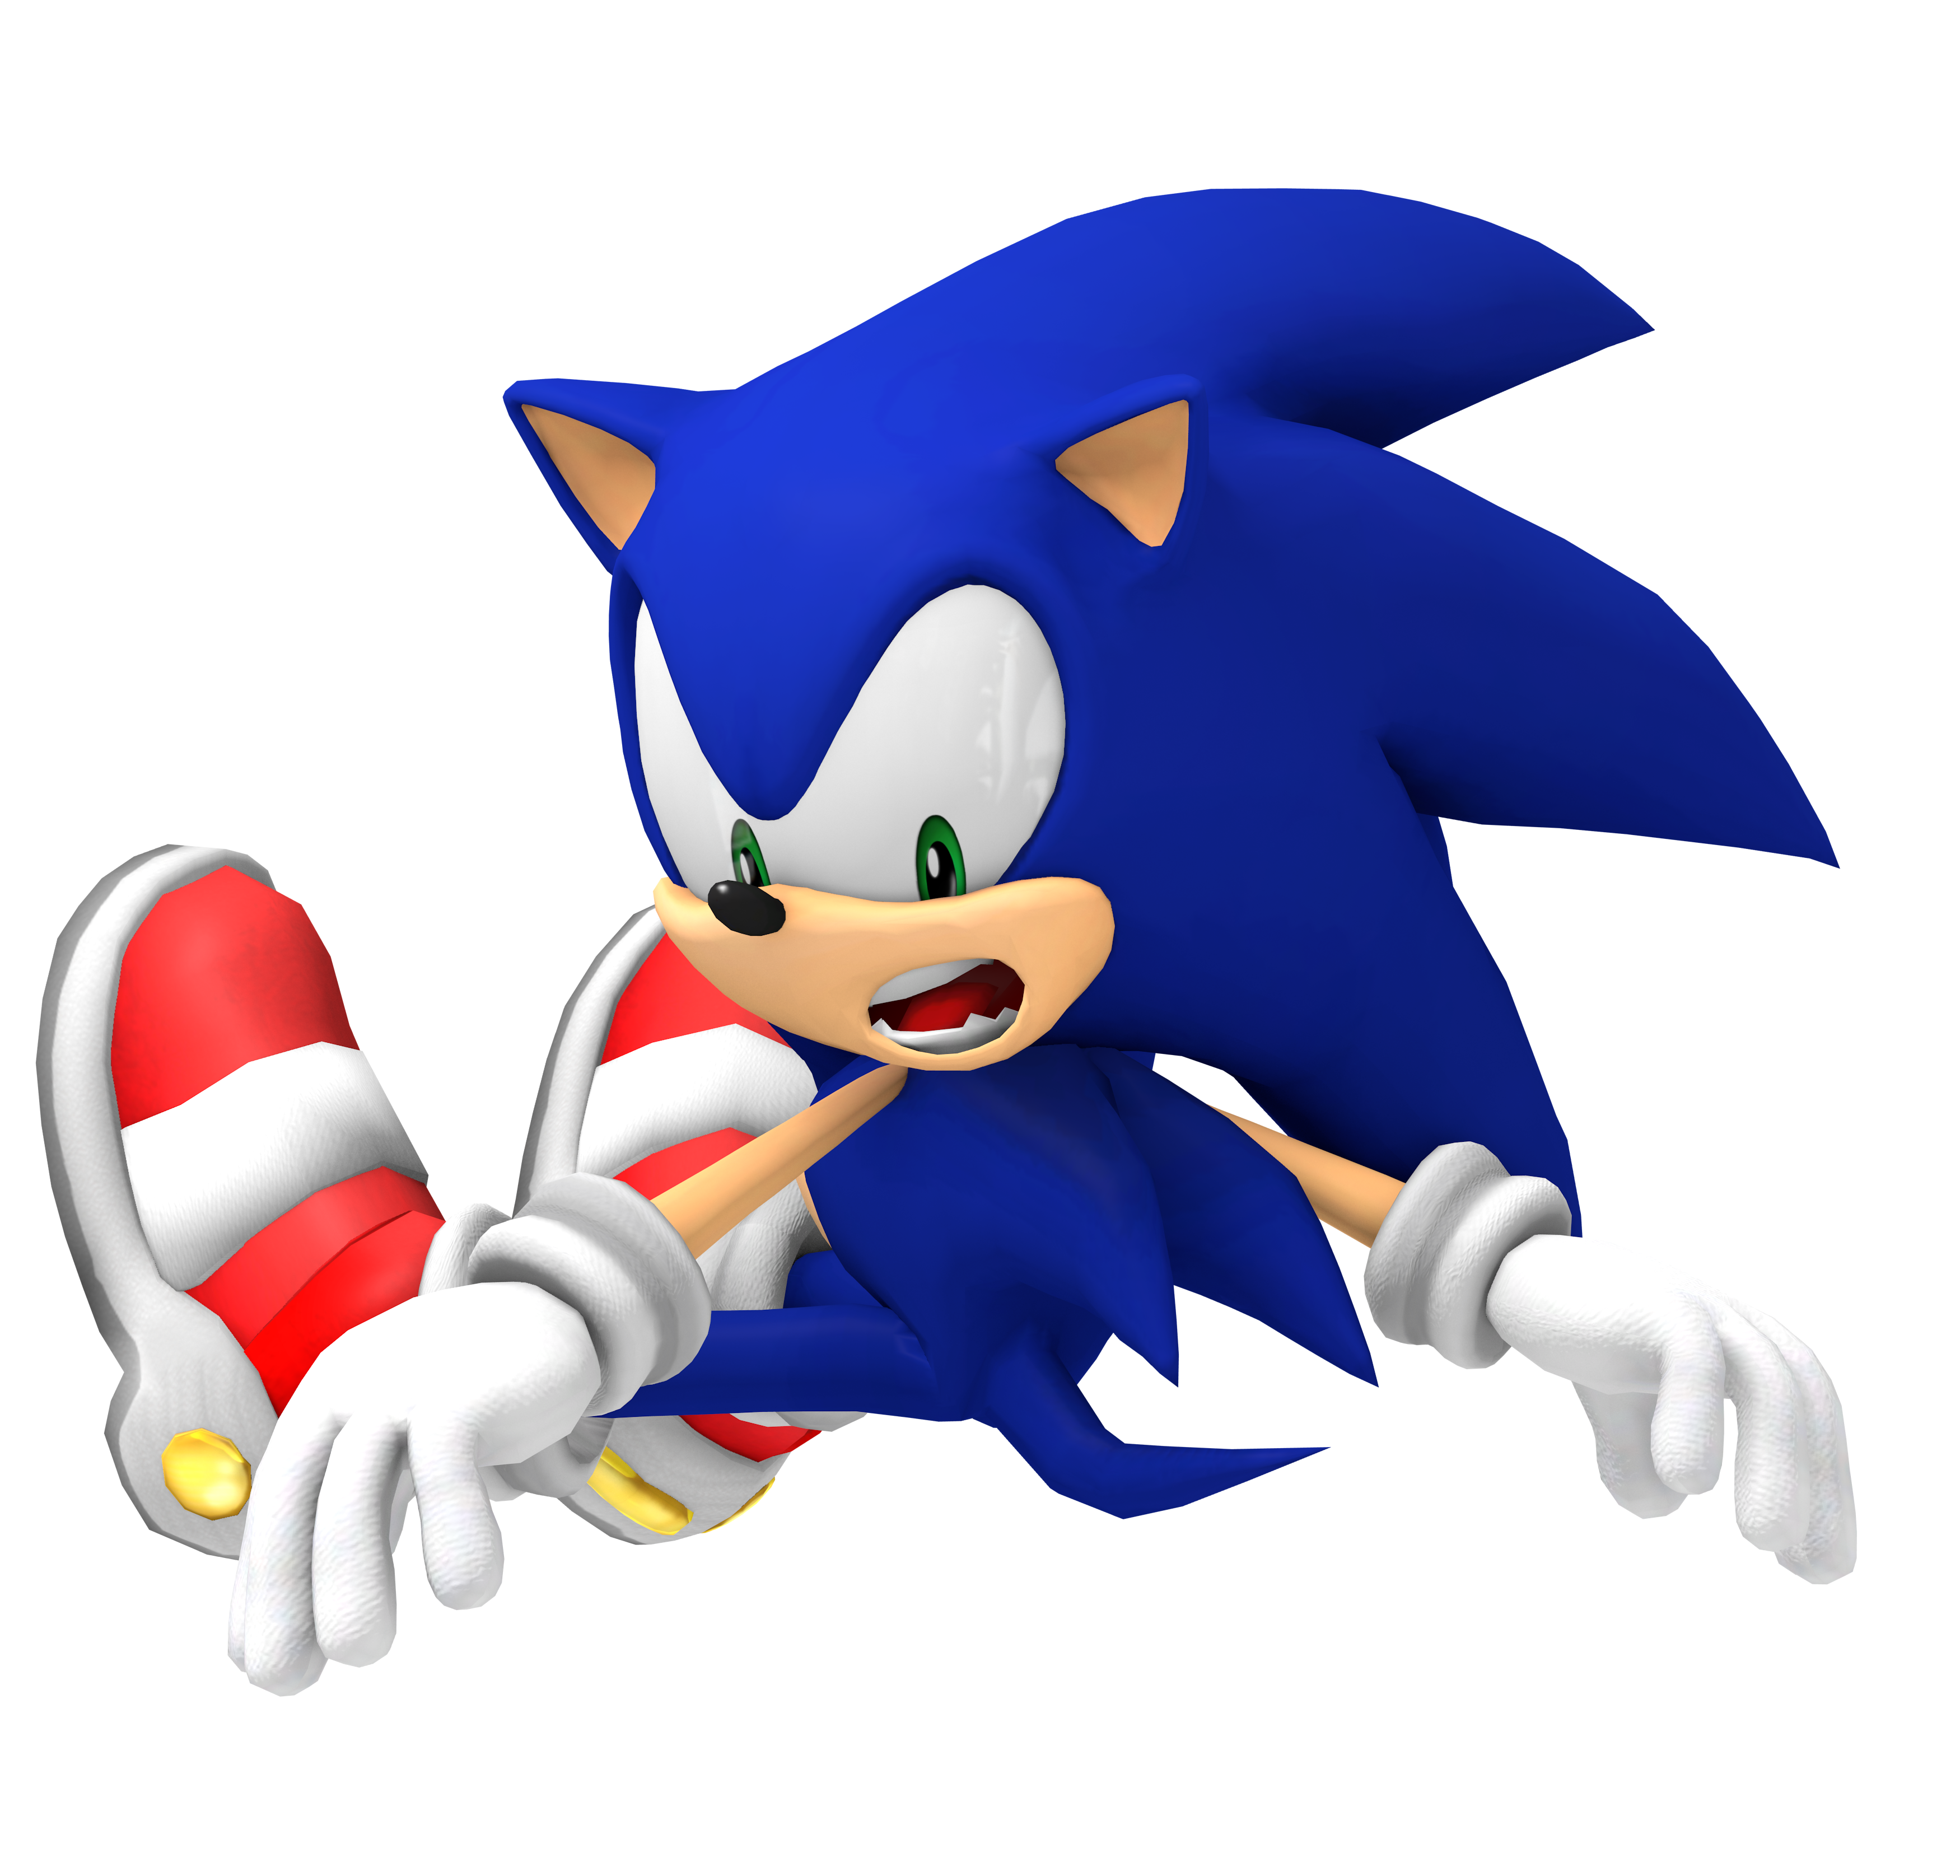 Chaos Emeralds, Sonic the Hedgehog Fanon Wiki